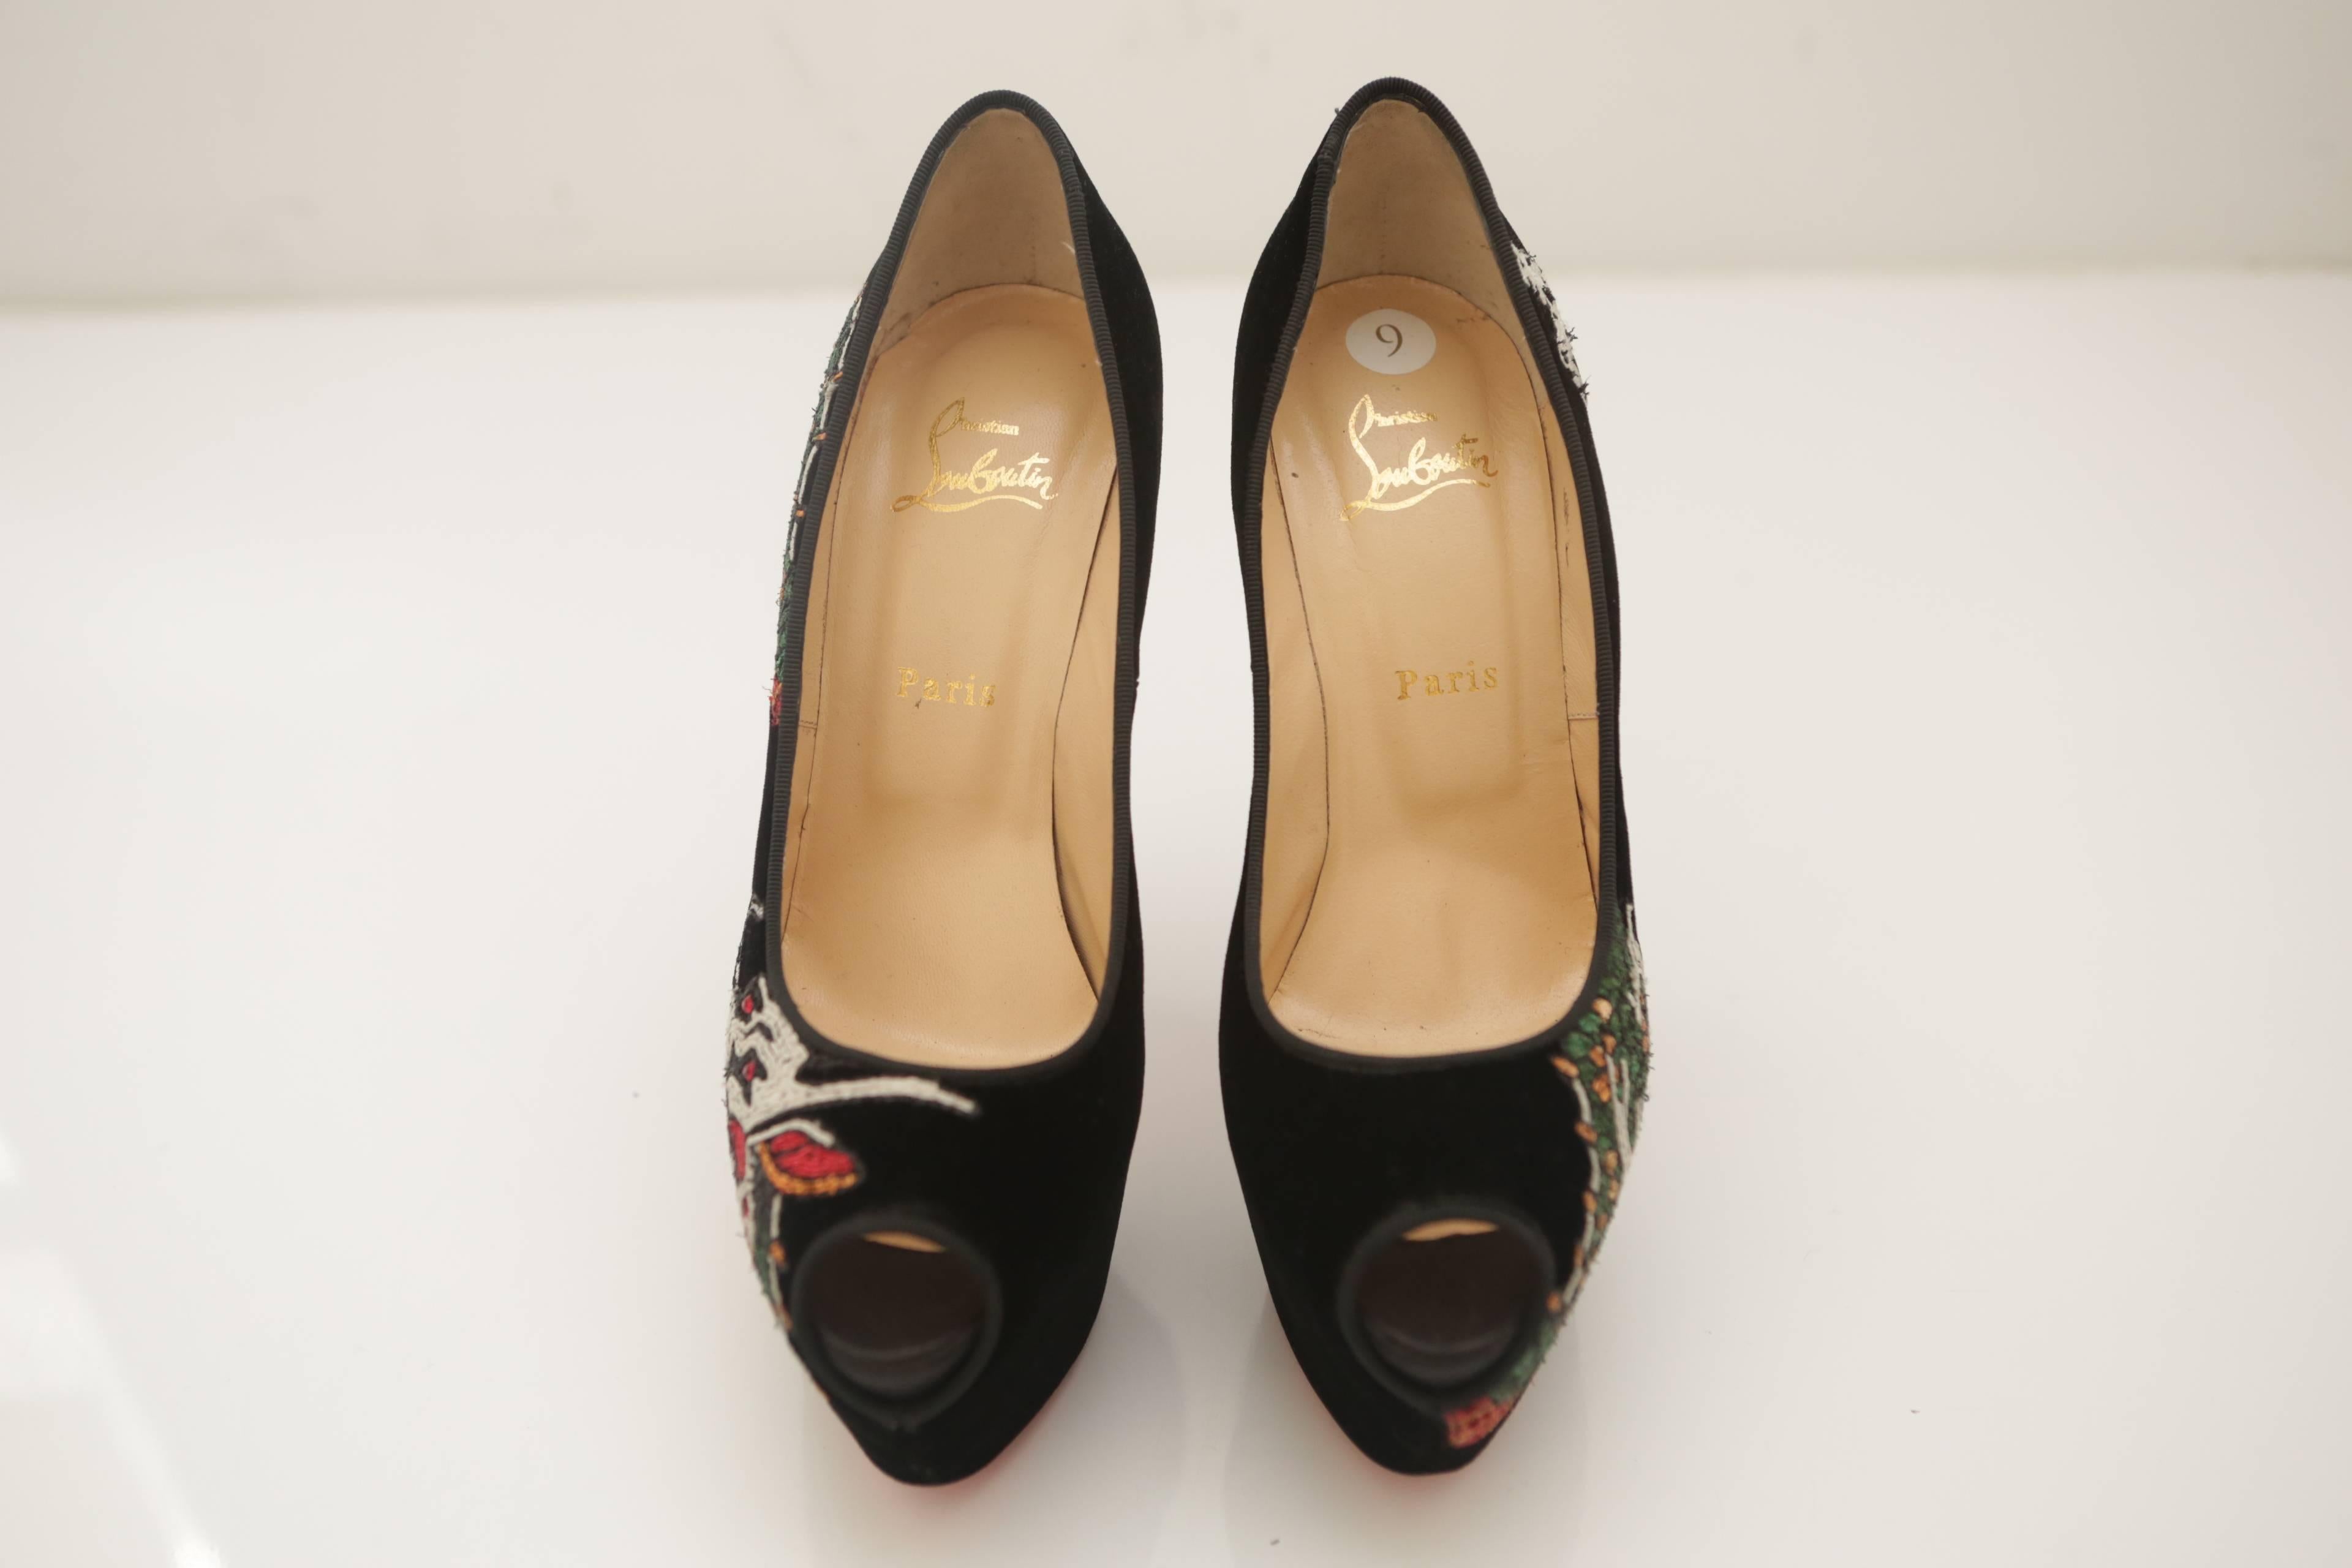 Christian Louboutin Highness Tattoo Dragon Black Platforms. Beaded embroidery on Suede. Heel approximately 6